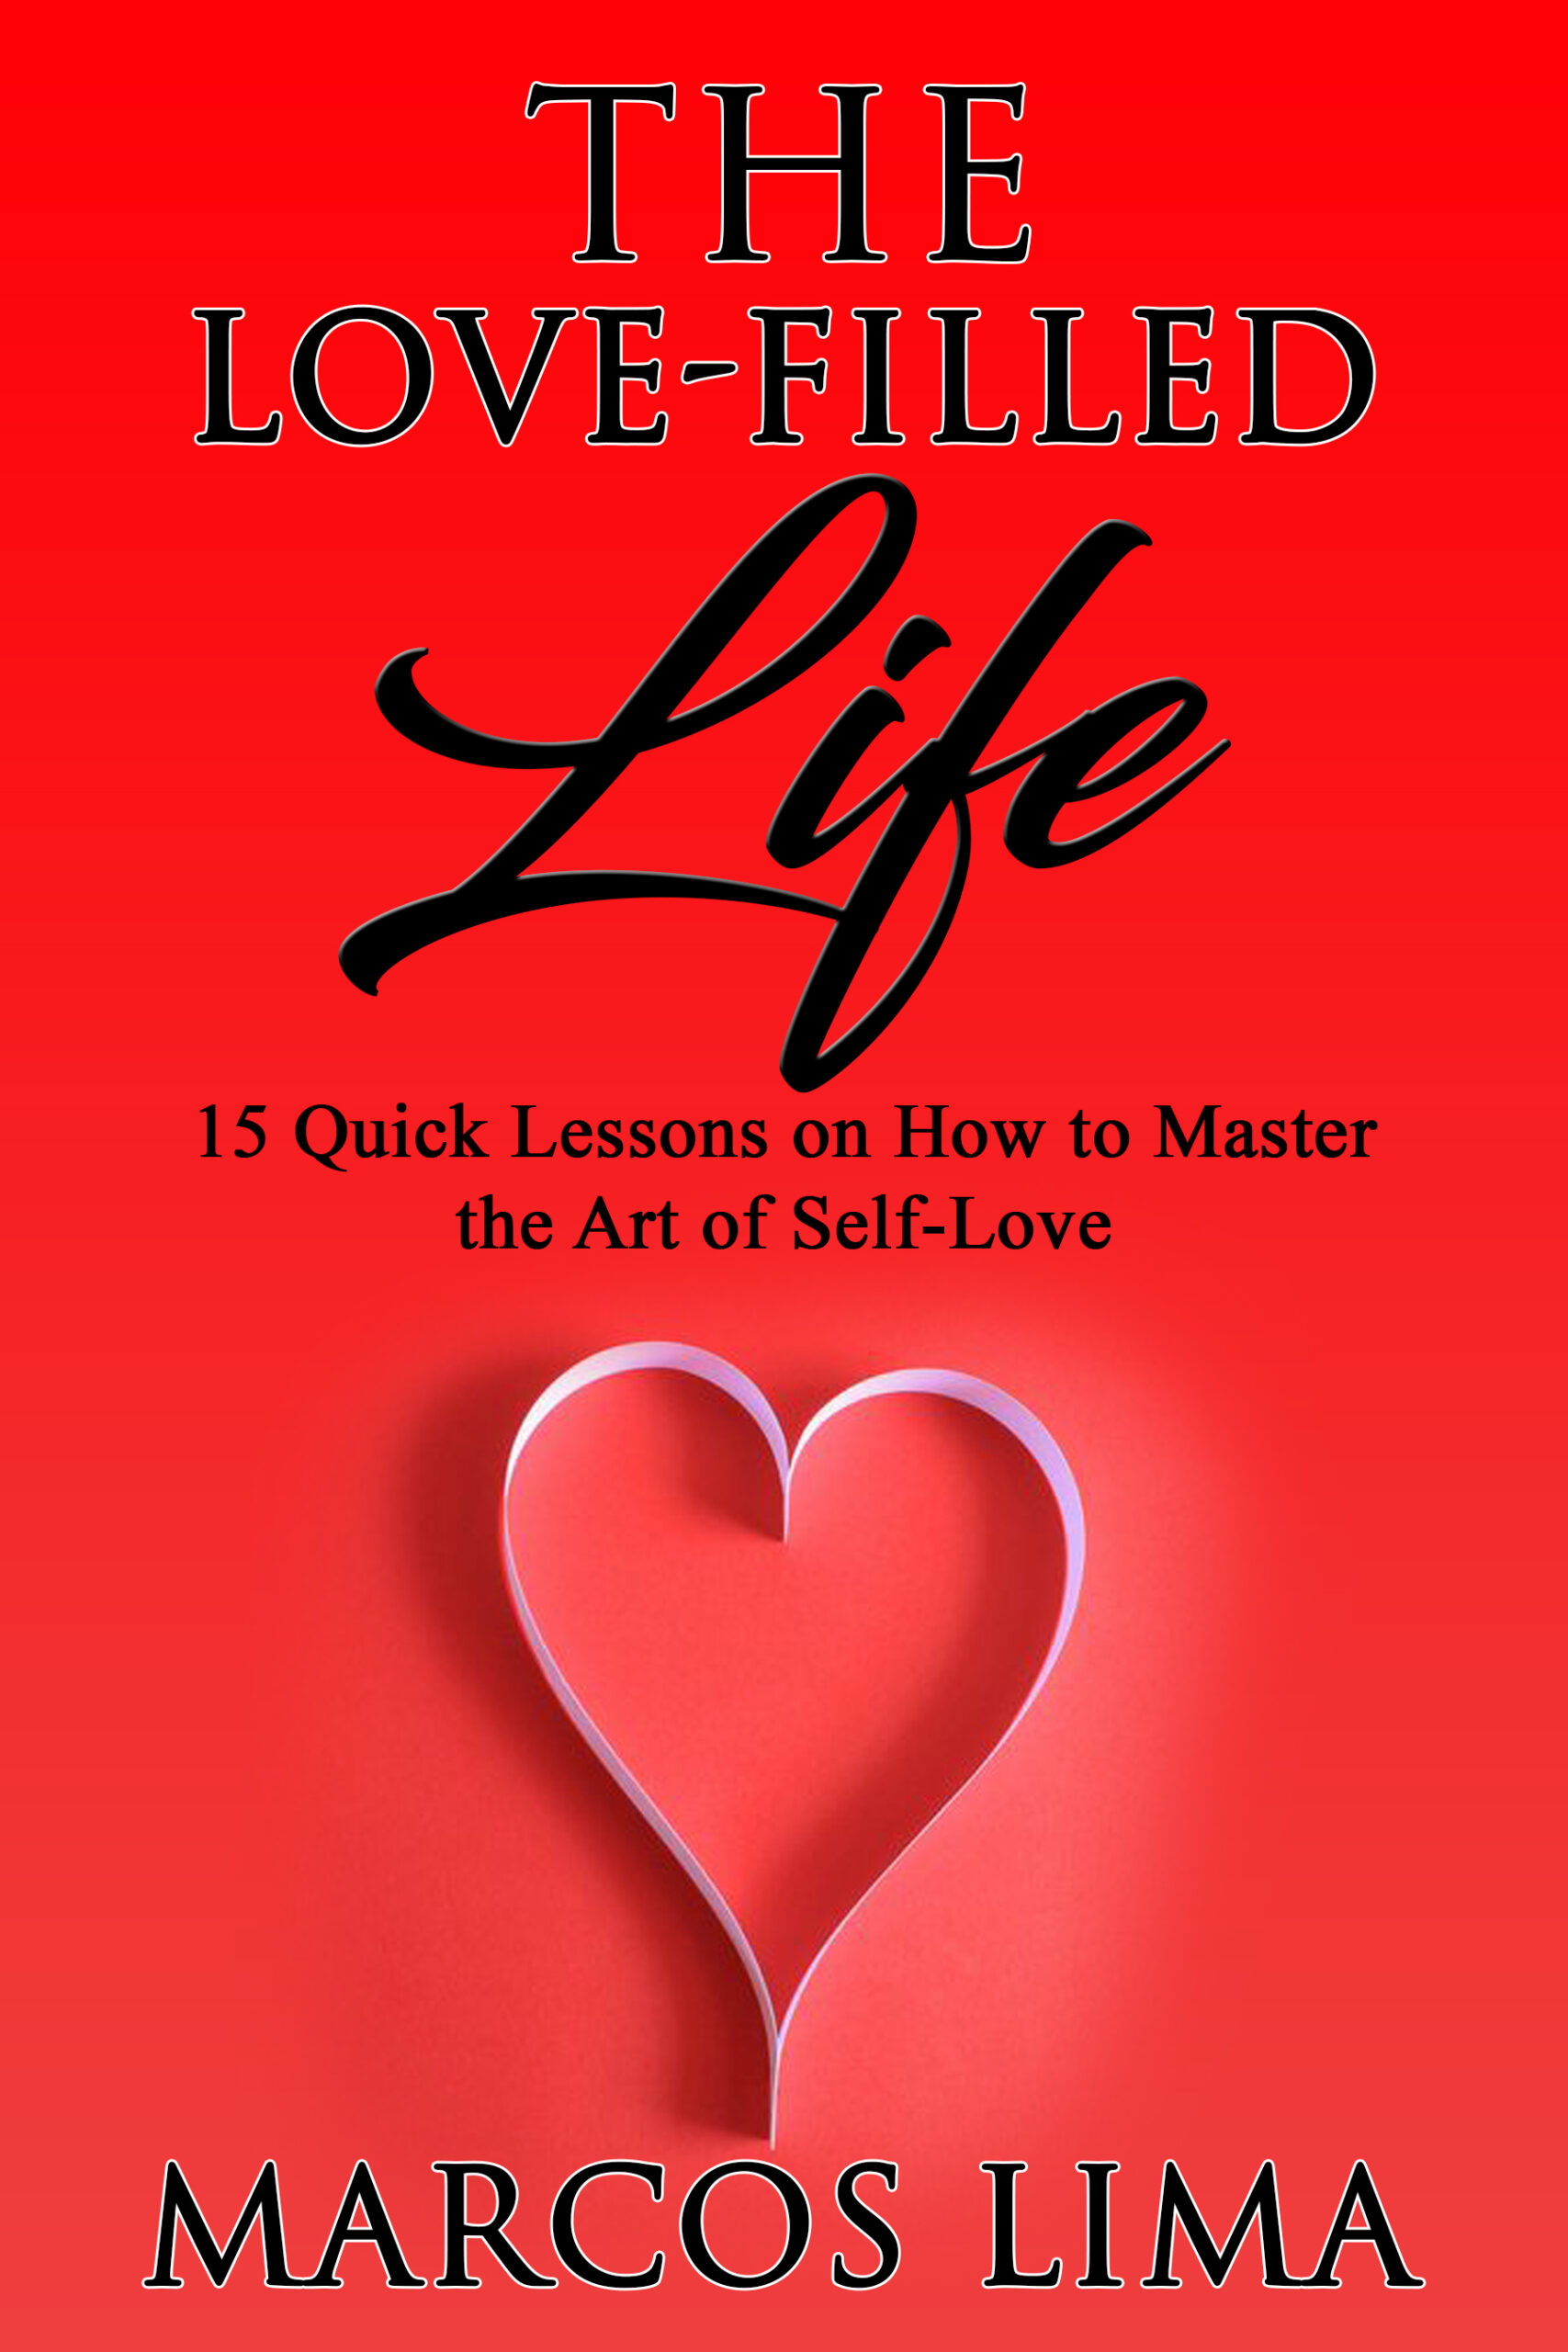 FREE: The Love-Filled Life: 15 Quick Lessons on How to Master the Art of Self-Love by Marcos Lima